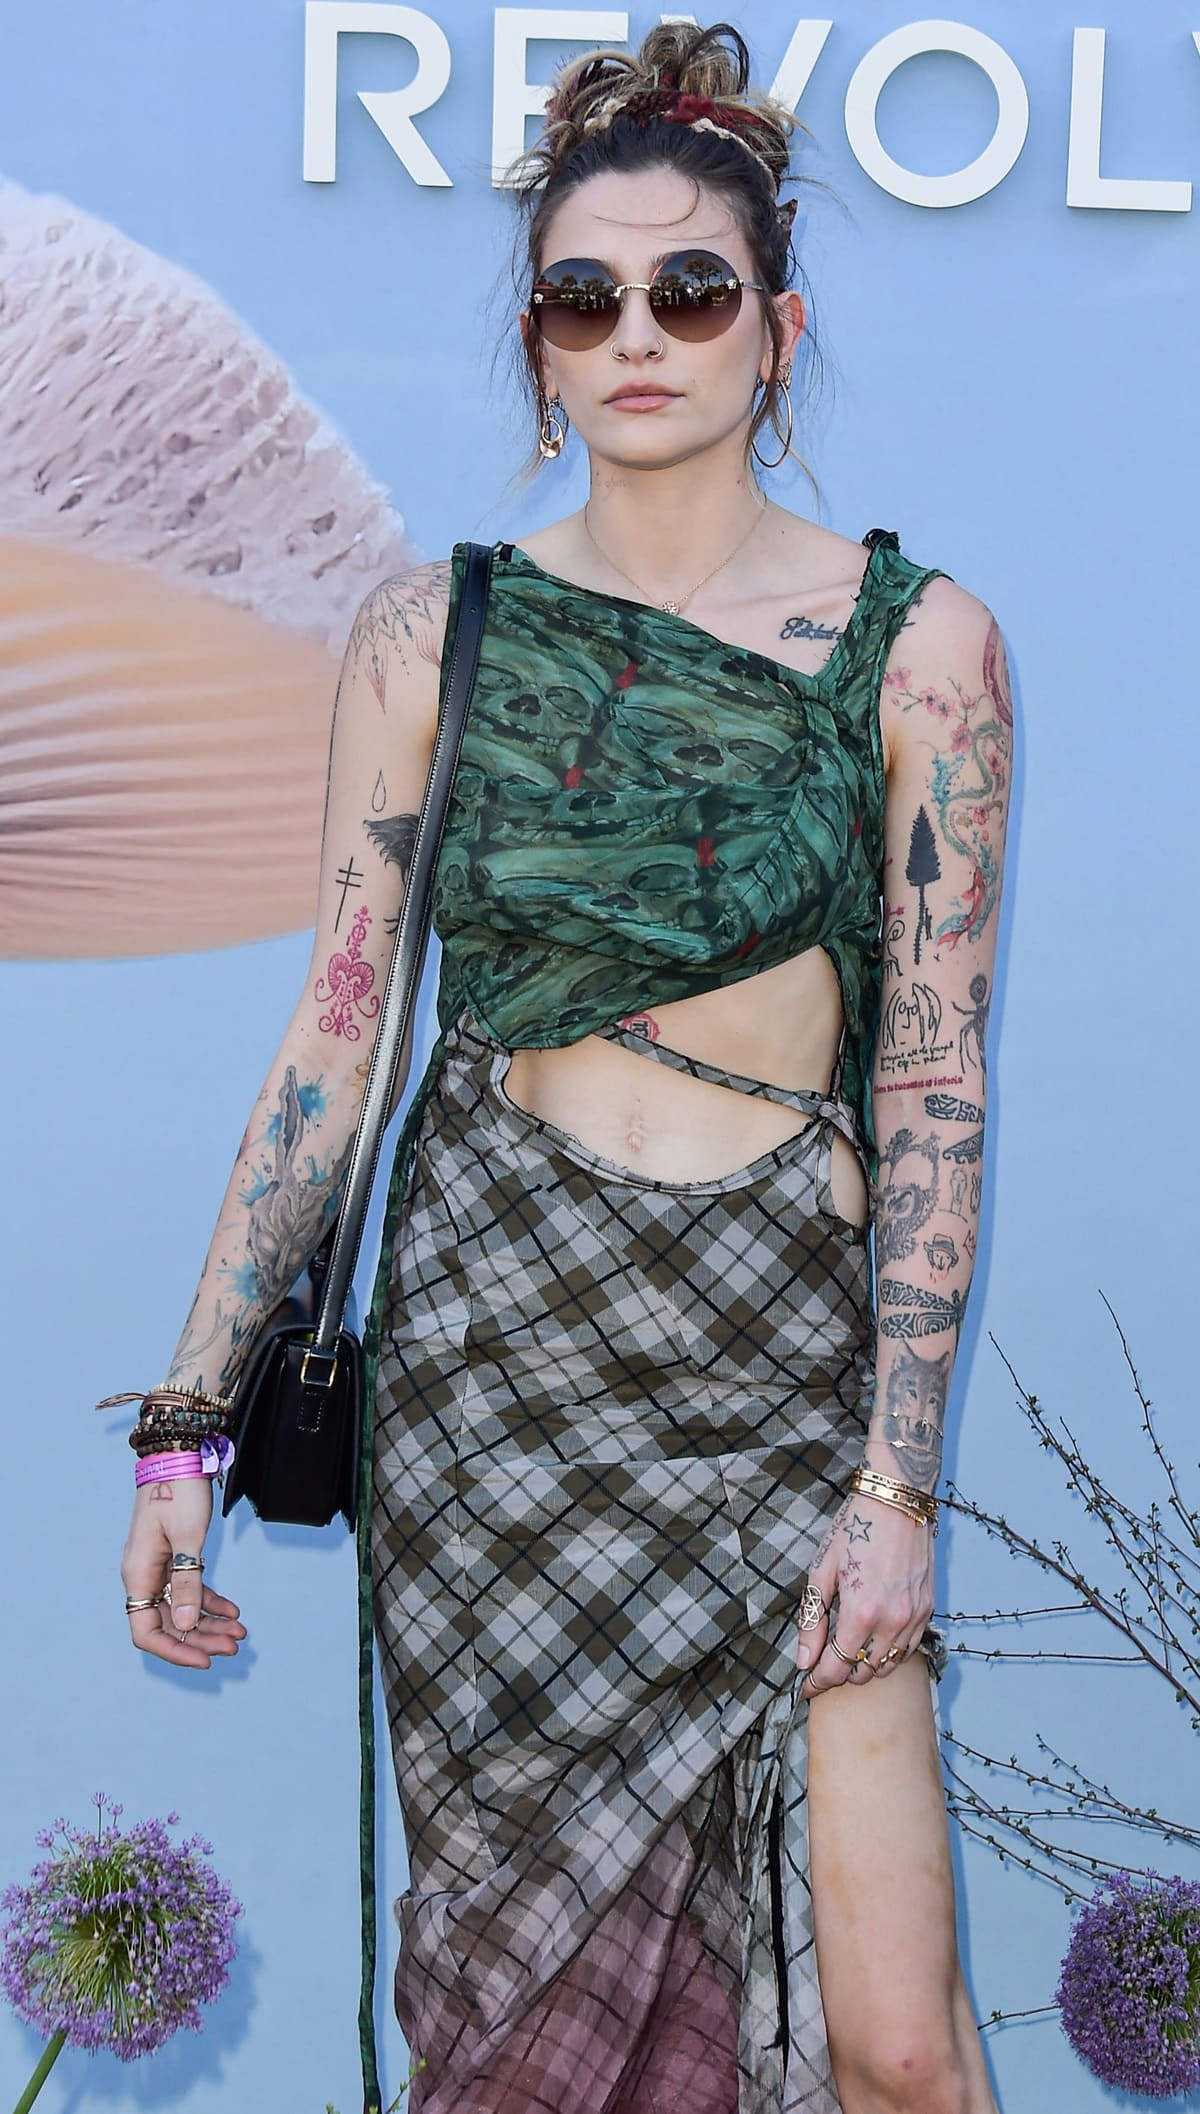 Paris Jackson Rocks Edgy Grunge Style in Steve Madden Combat Boots at ...